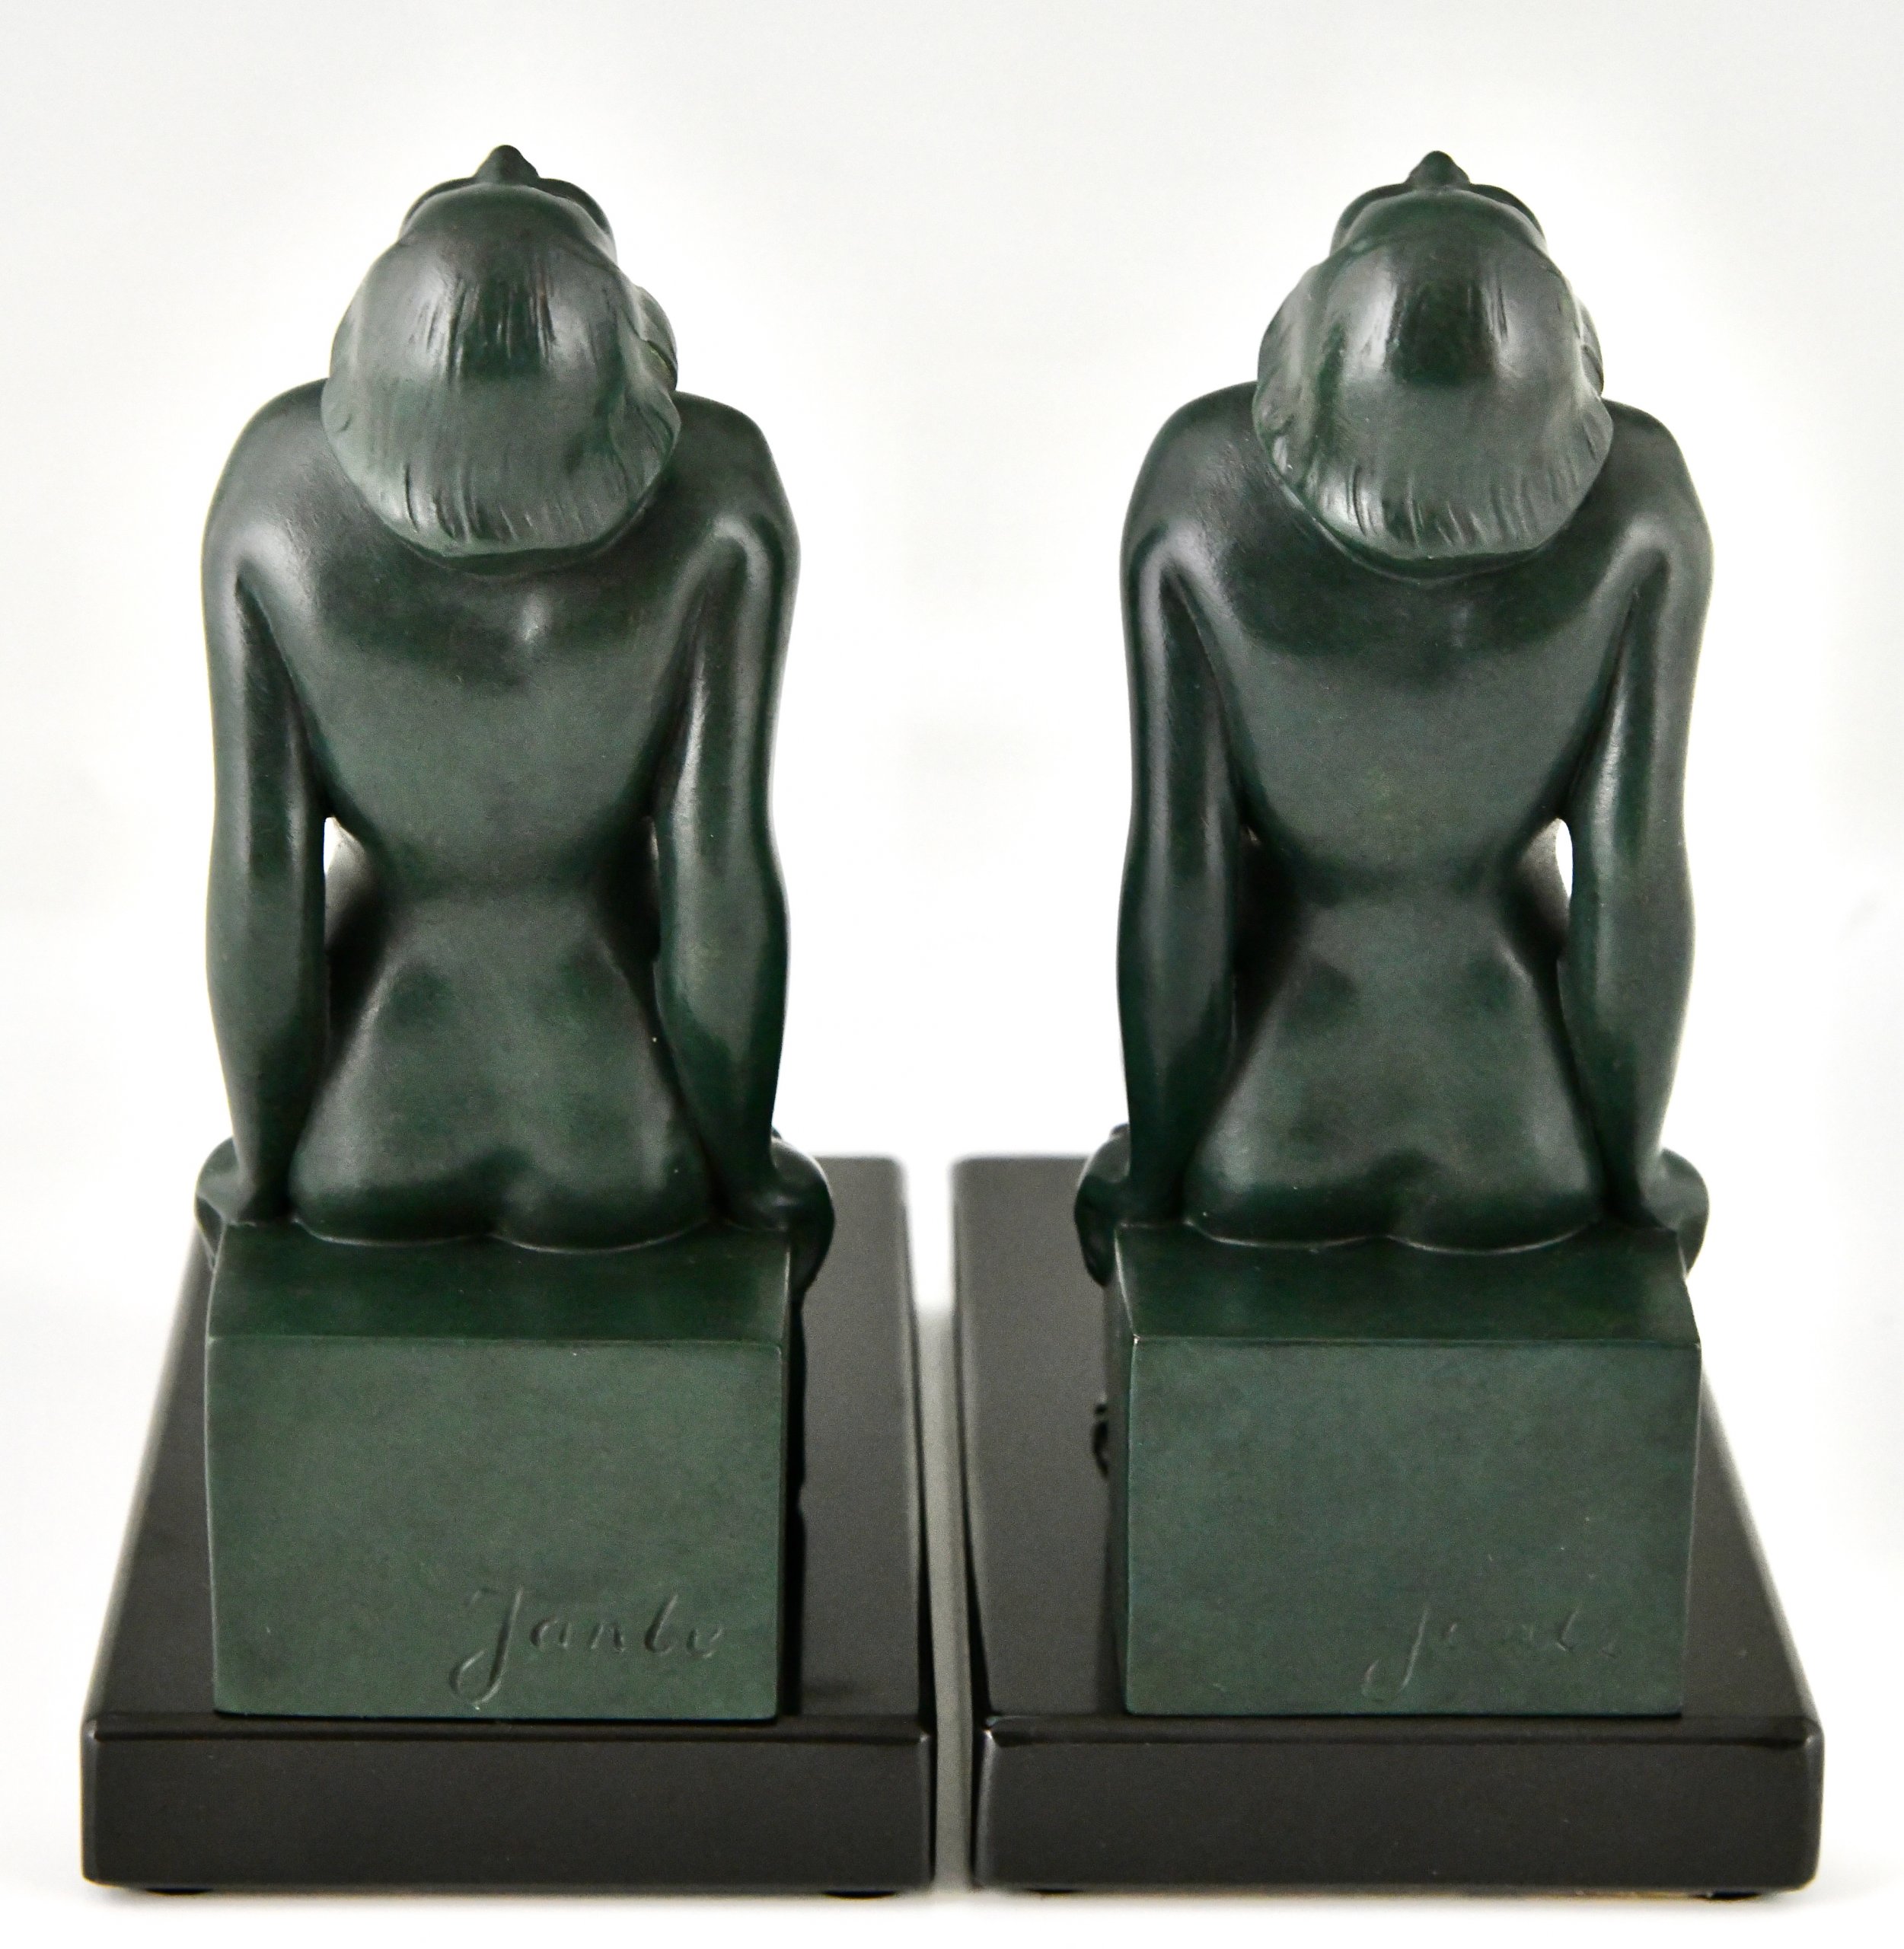 Art Deco bookends with seated nudes